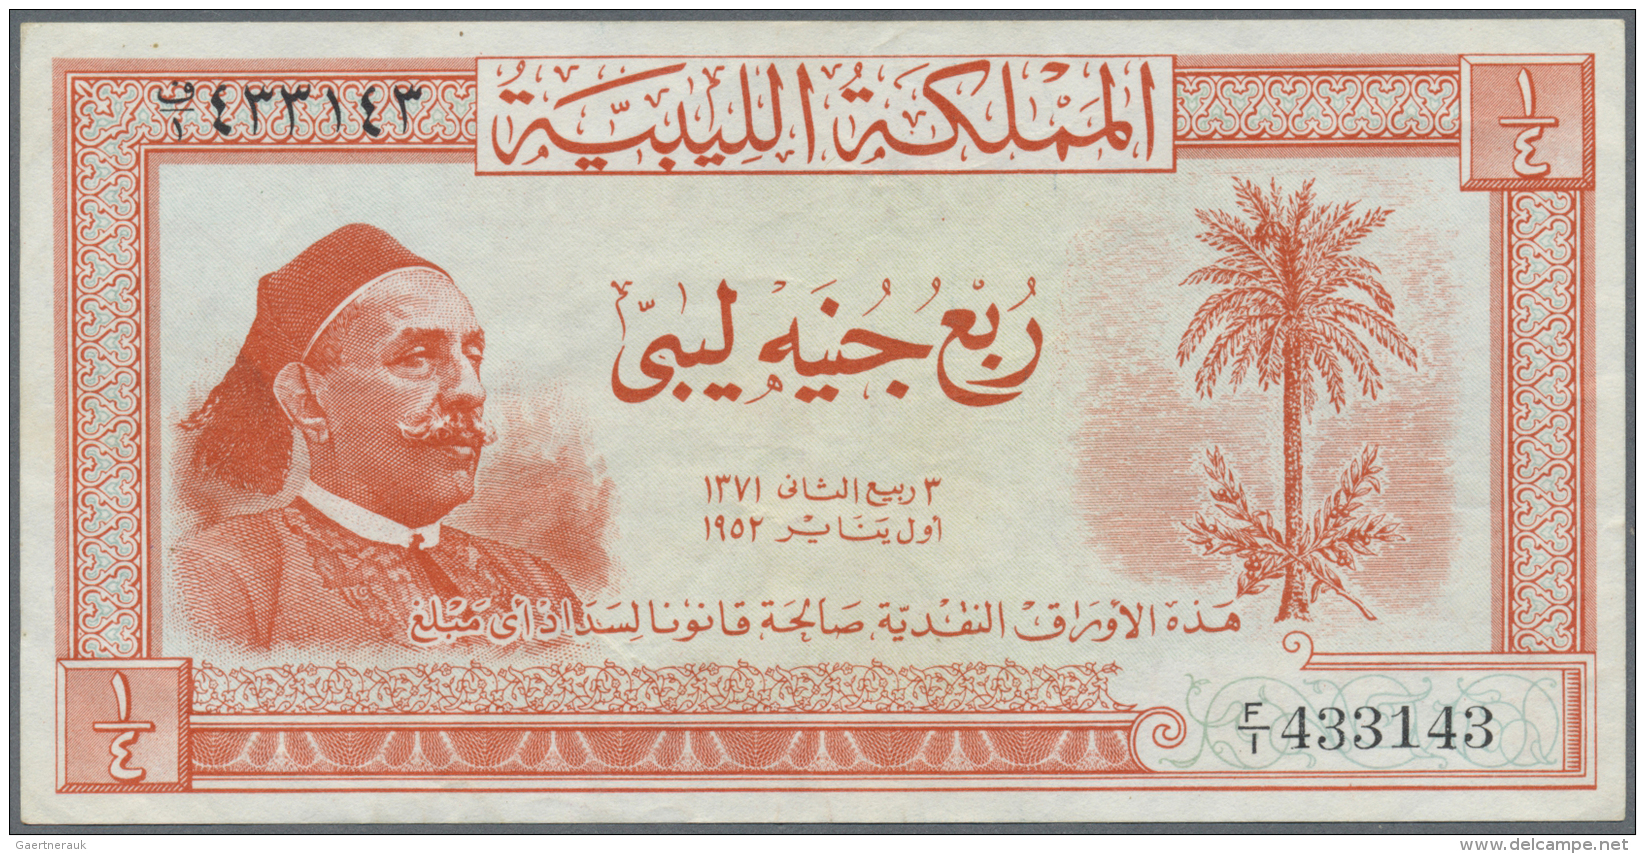 Libya / Libyen: 1/4 Pound 1952, P.14 With Portrait Of King Muhammad Idris As Sanussi At Left In Excellent Condition With - Libye